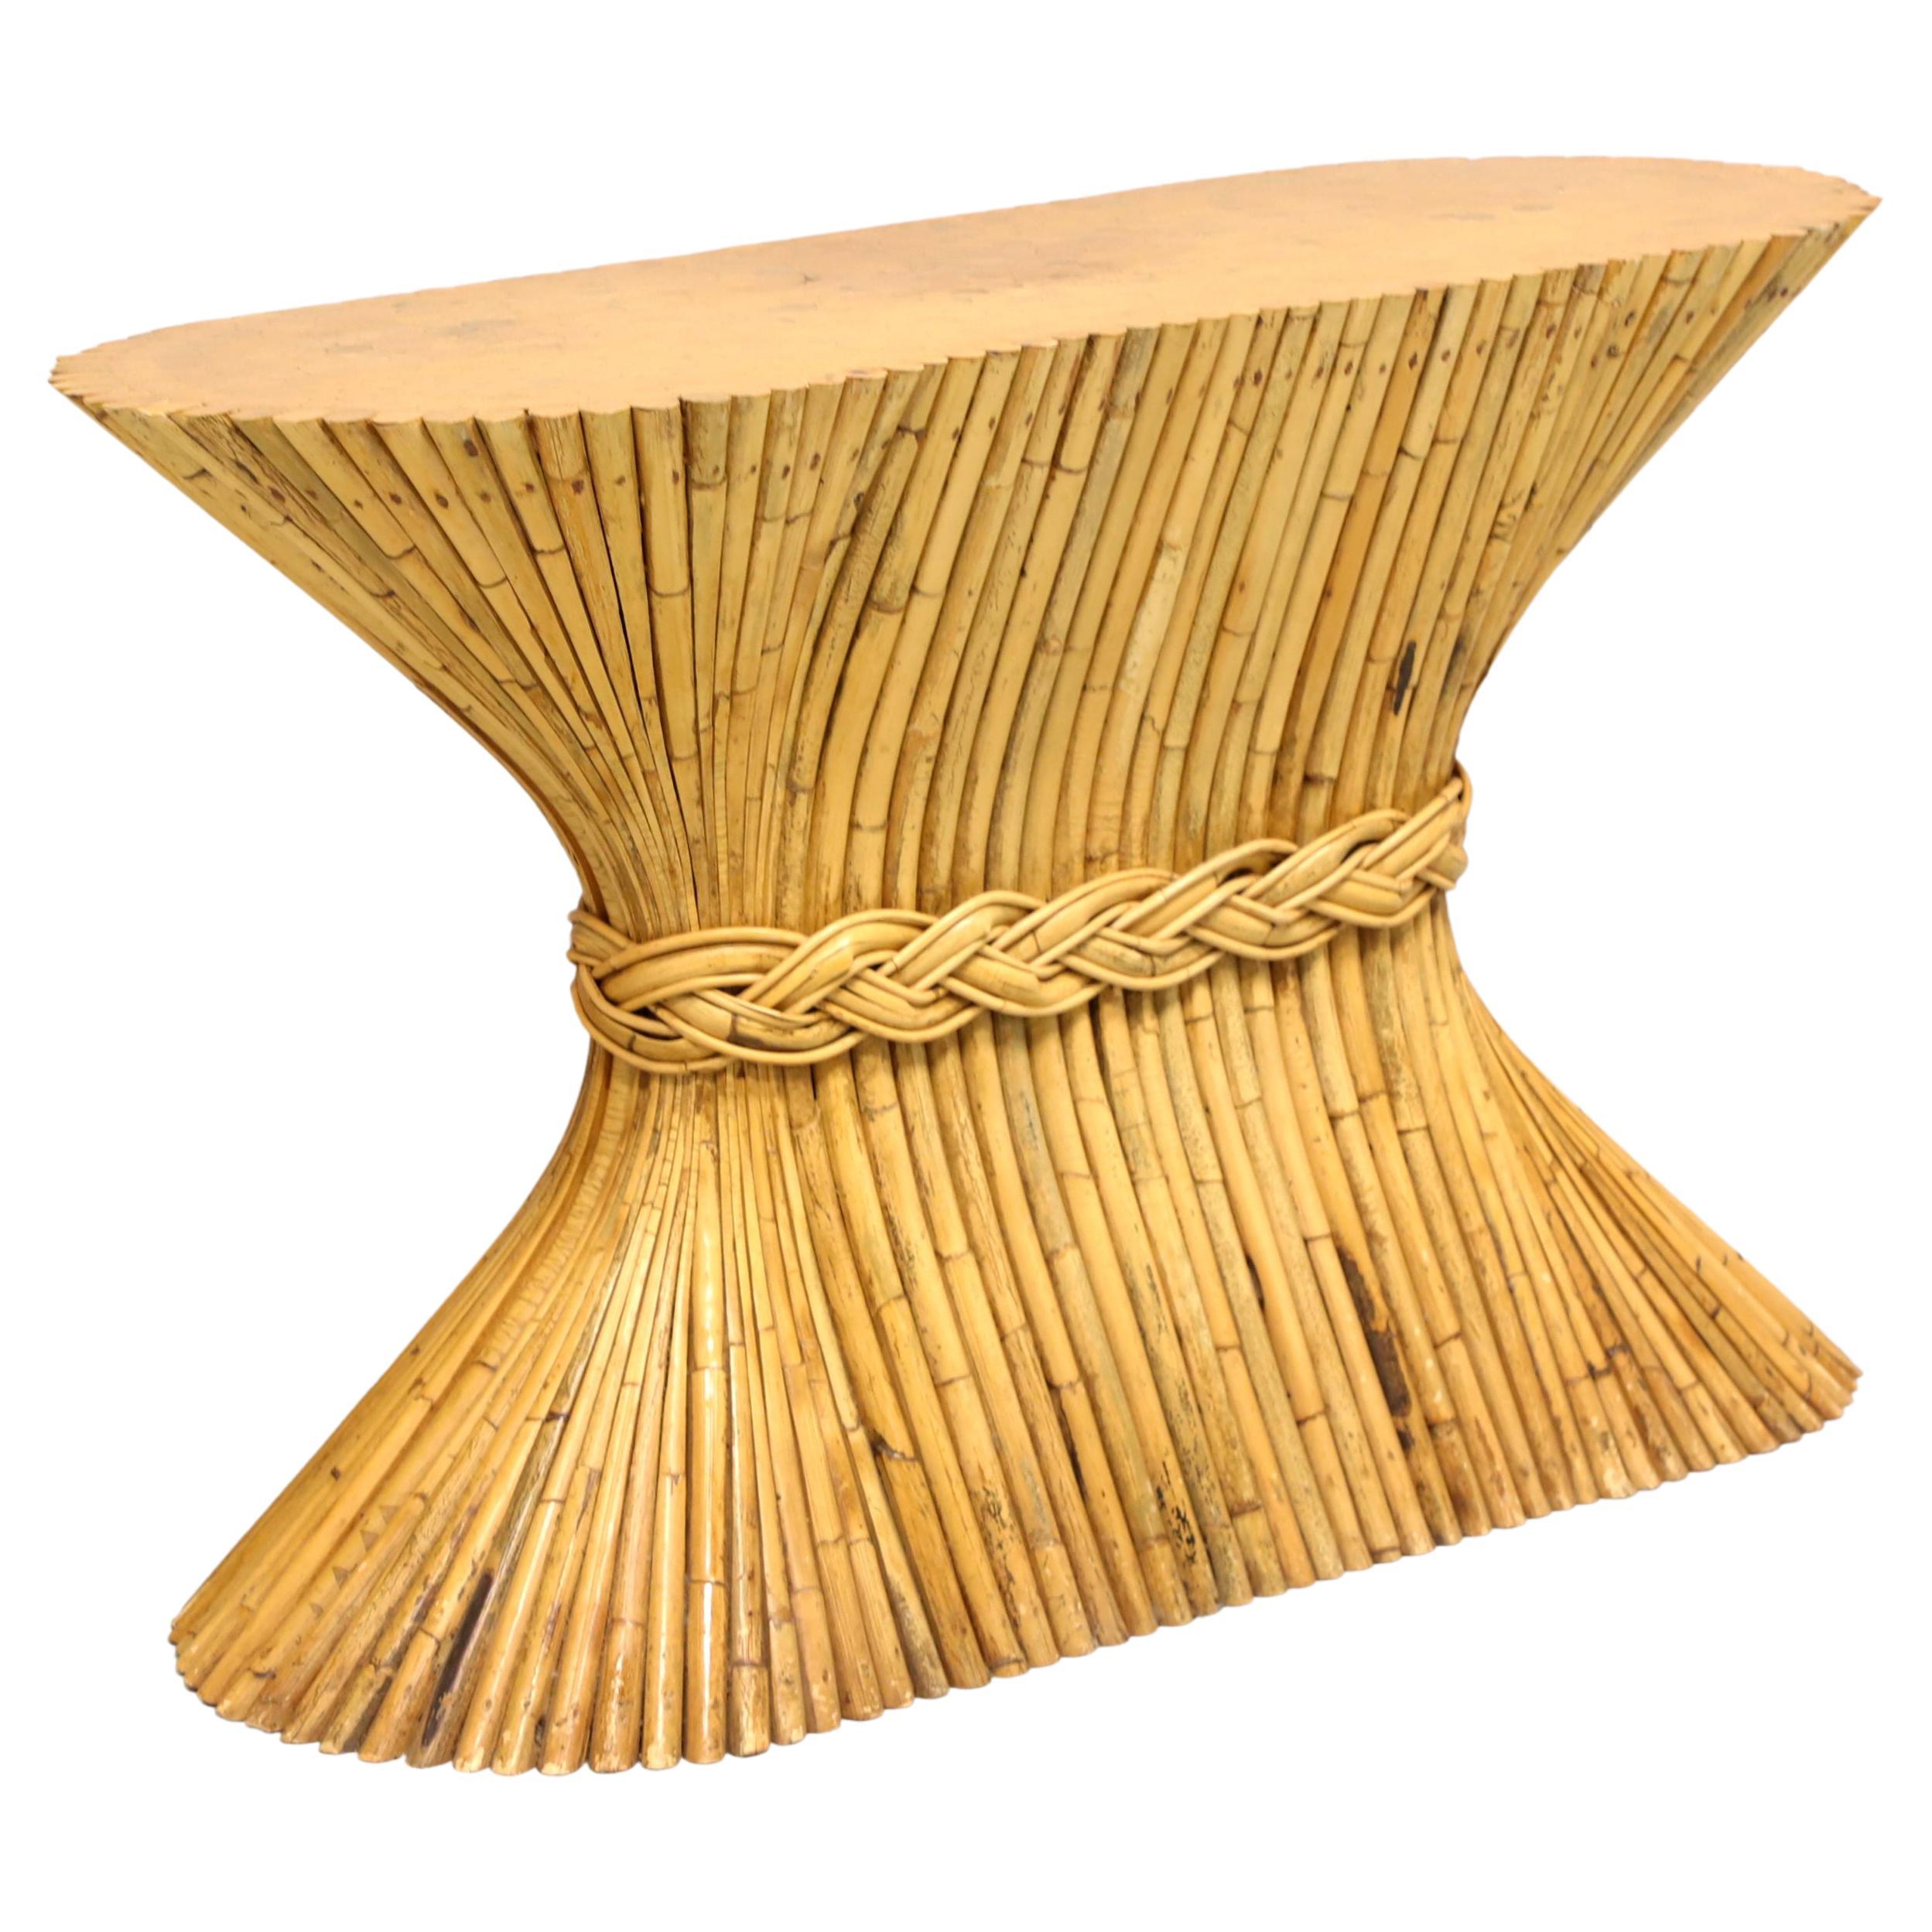 McGUIRE "Sheaf of Wheat" Faux Bamboo Dining Table Pedestal Base